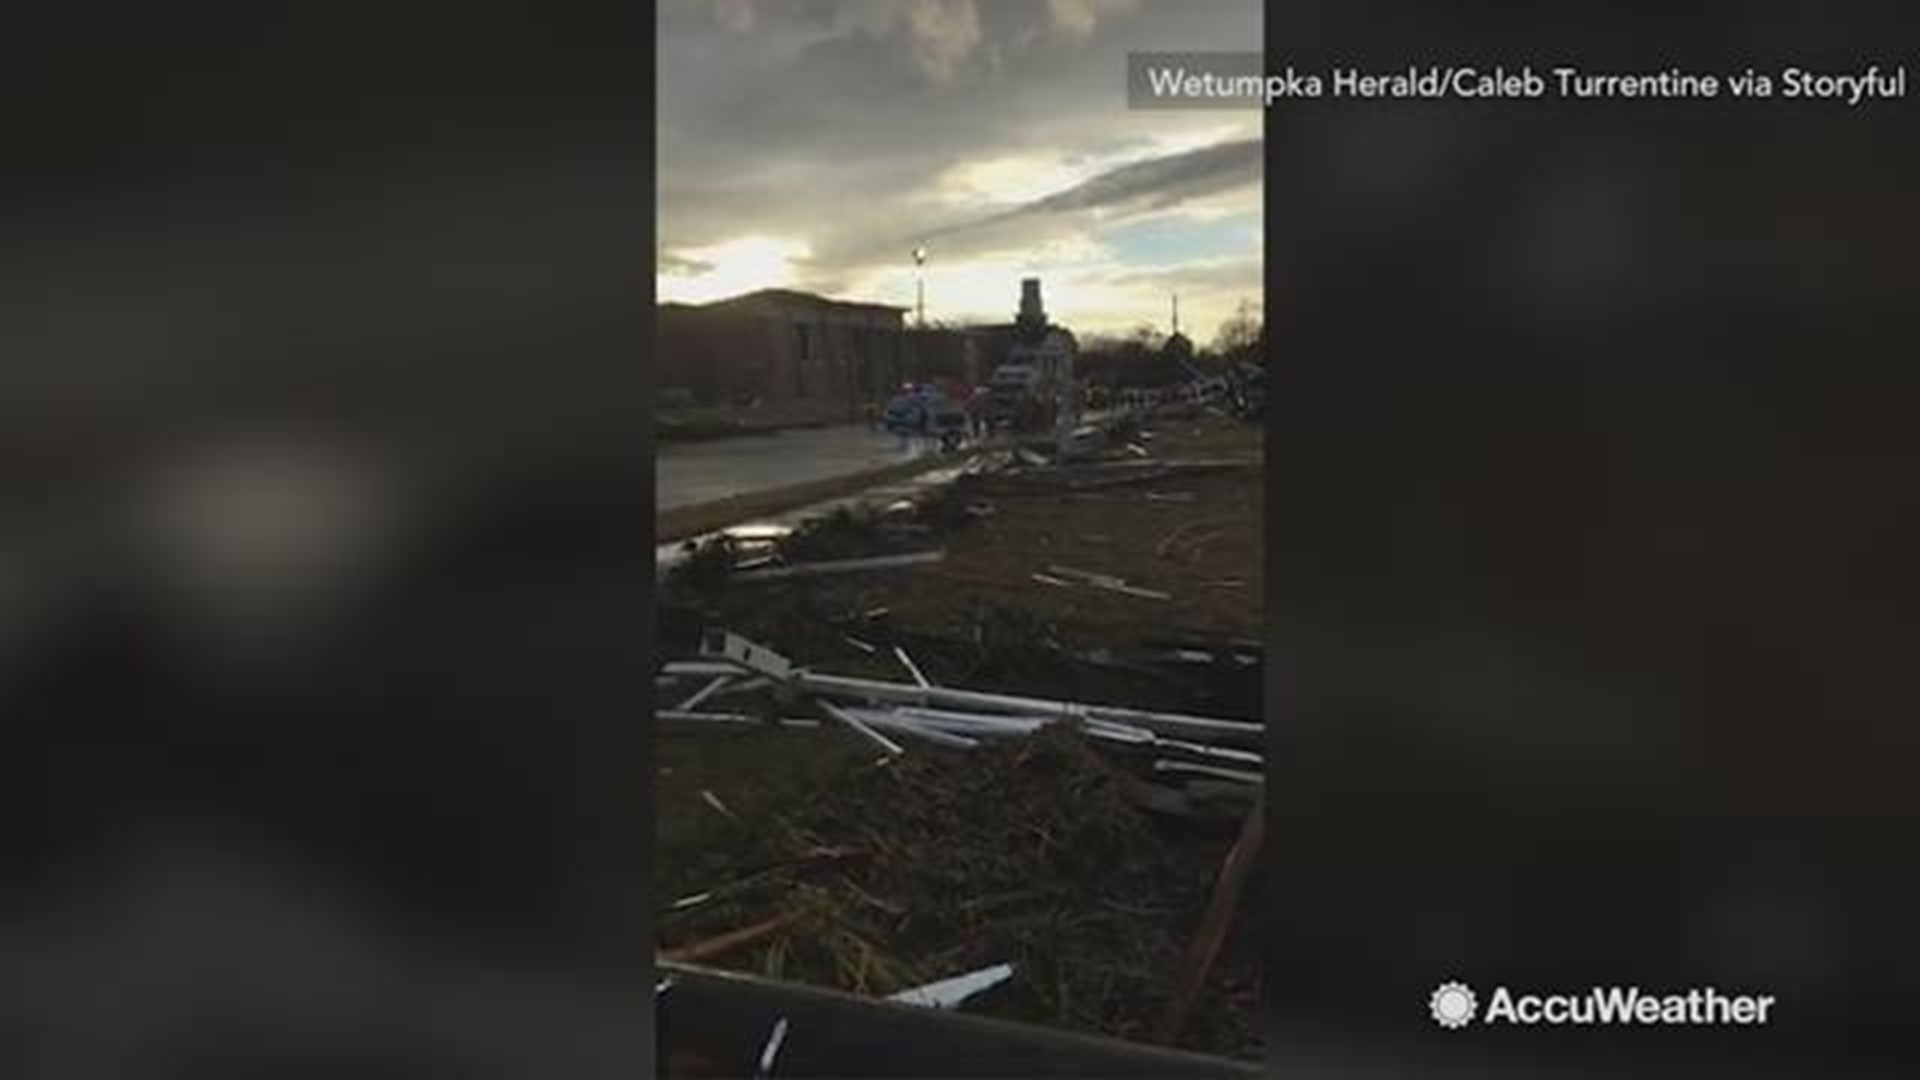 When a tornado tore through Wetumpka, Alabama on Jan 19 one of the town's major intersections was left in shambles.